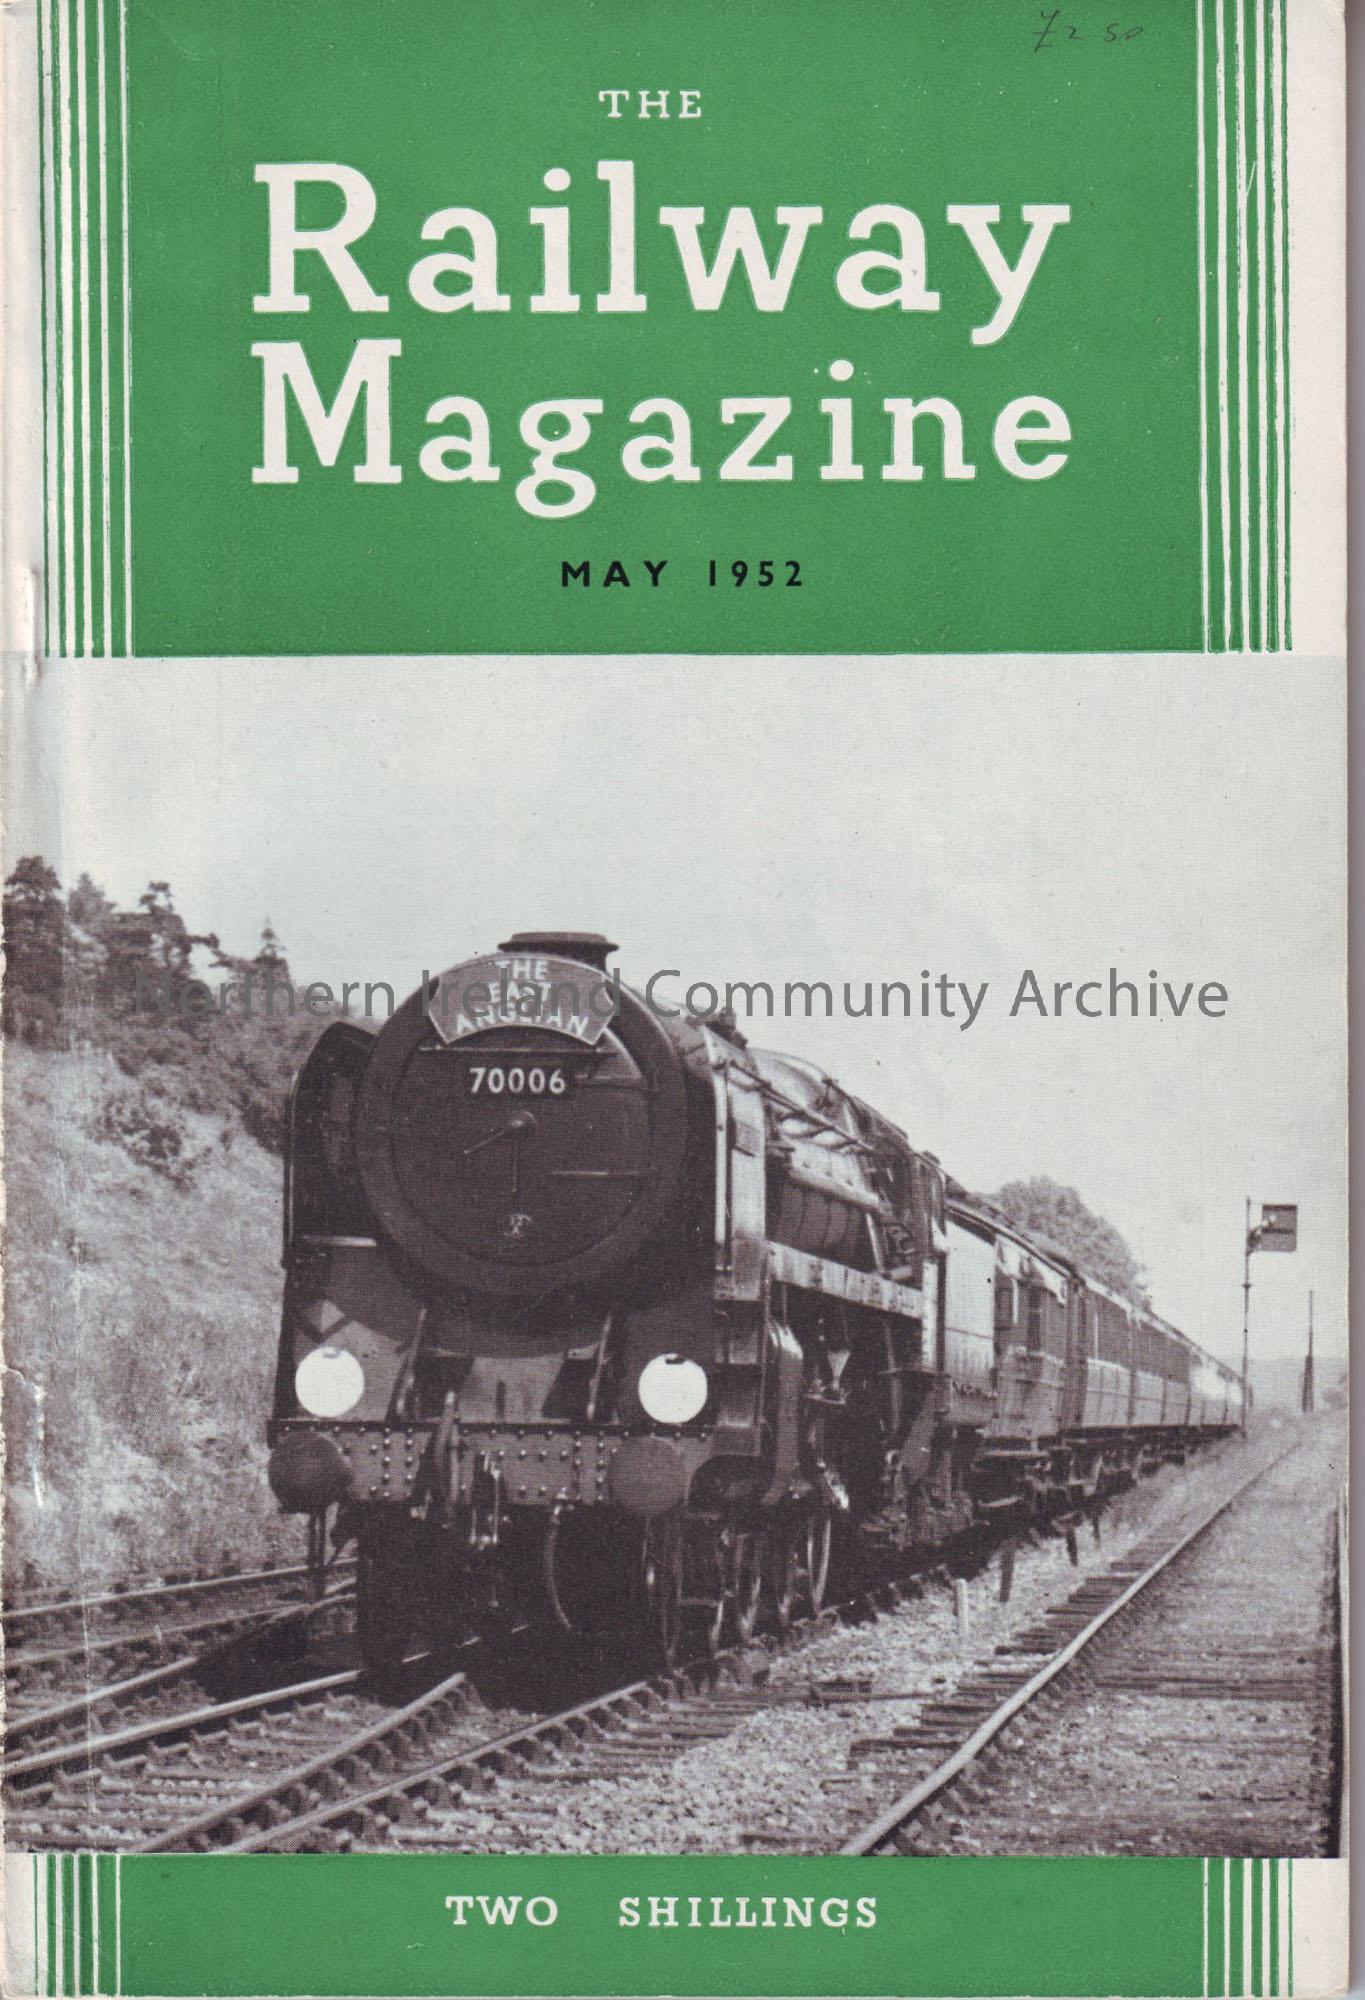 The Railway Magazine May 1952. Includes an article on the Ballycastle Railway, pp338-343